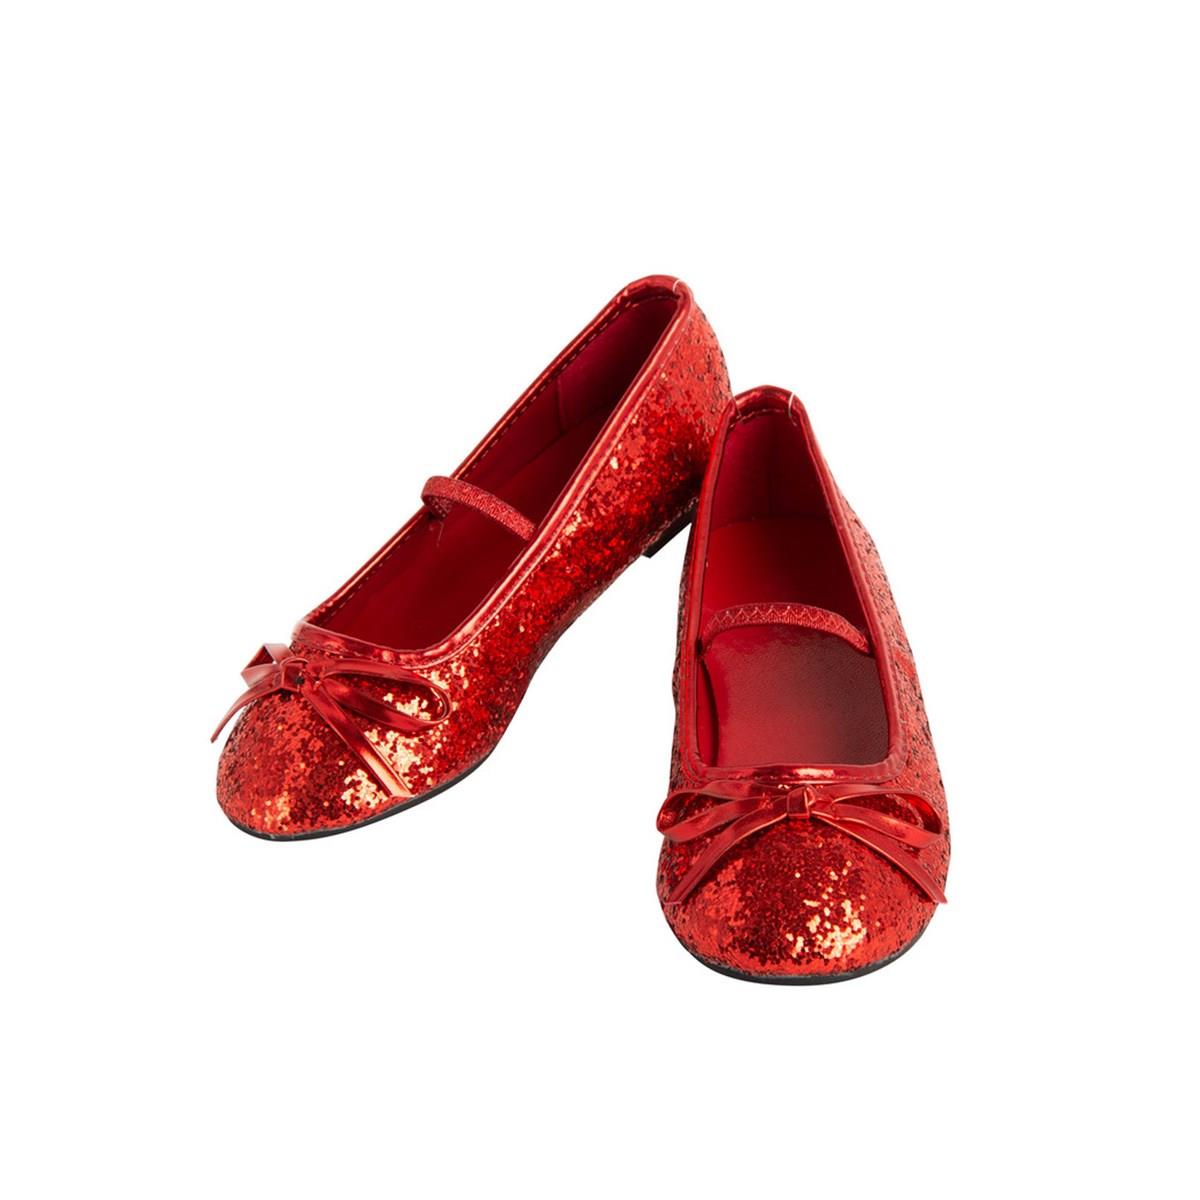 Picture of Rubies 278320 Girls Ballet Shoe - Red, Size 2-3